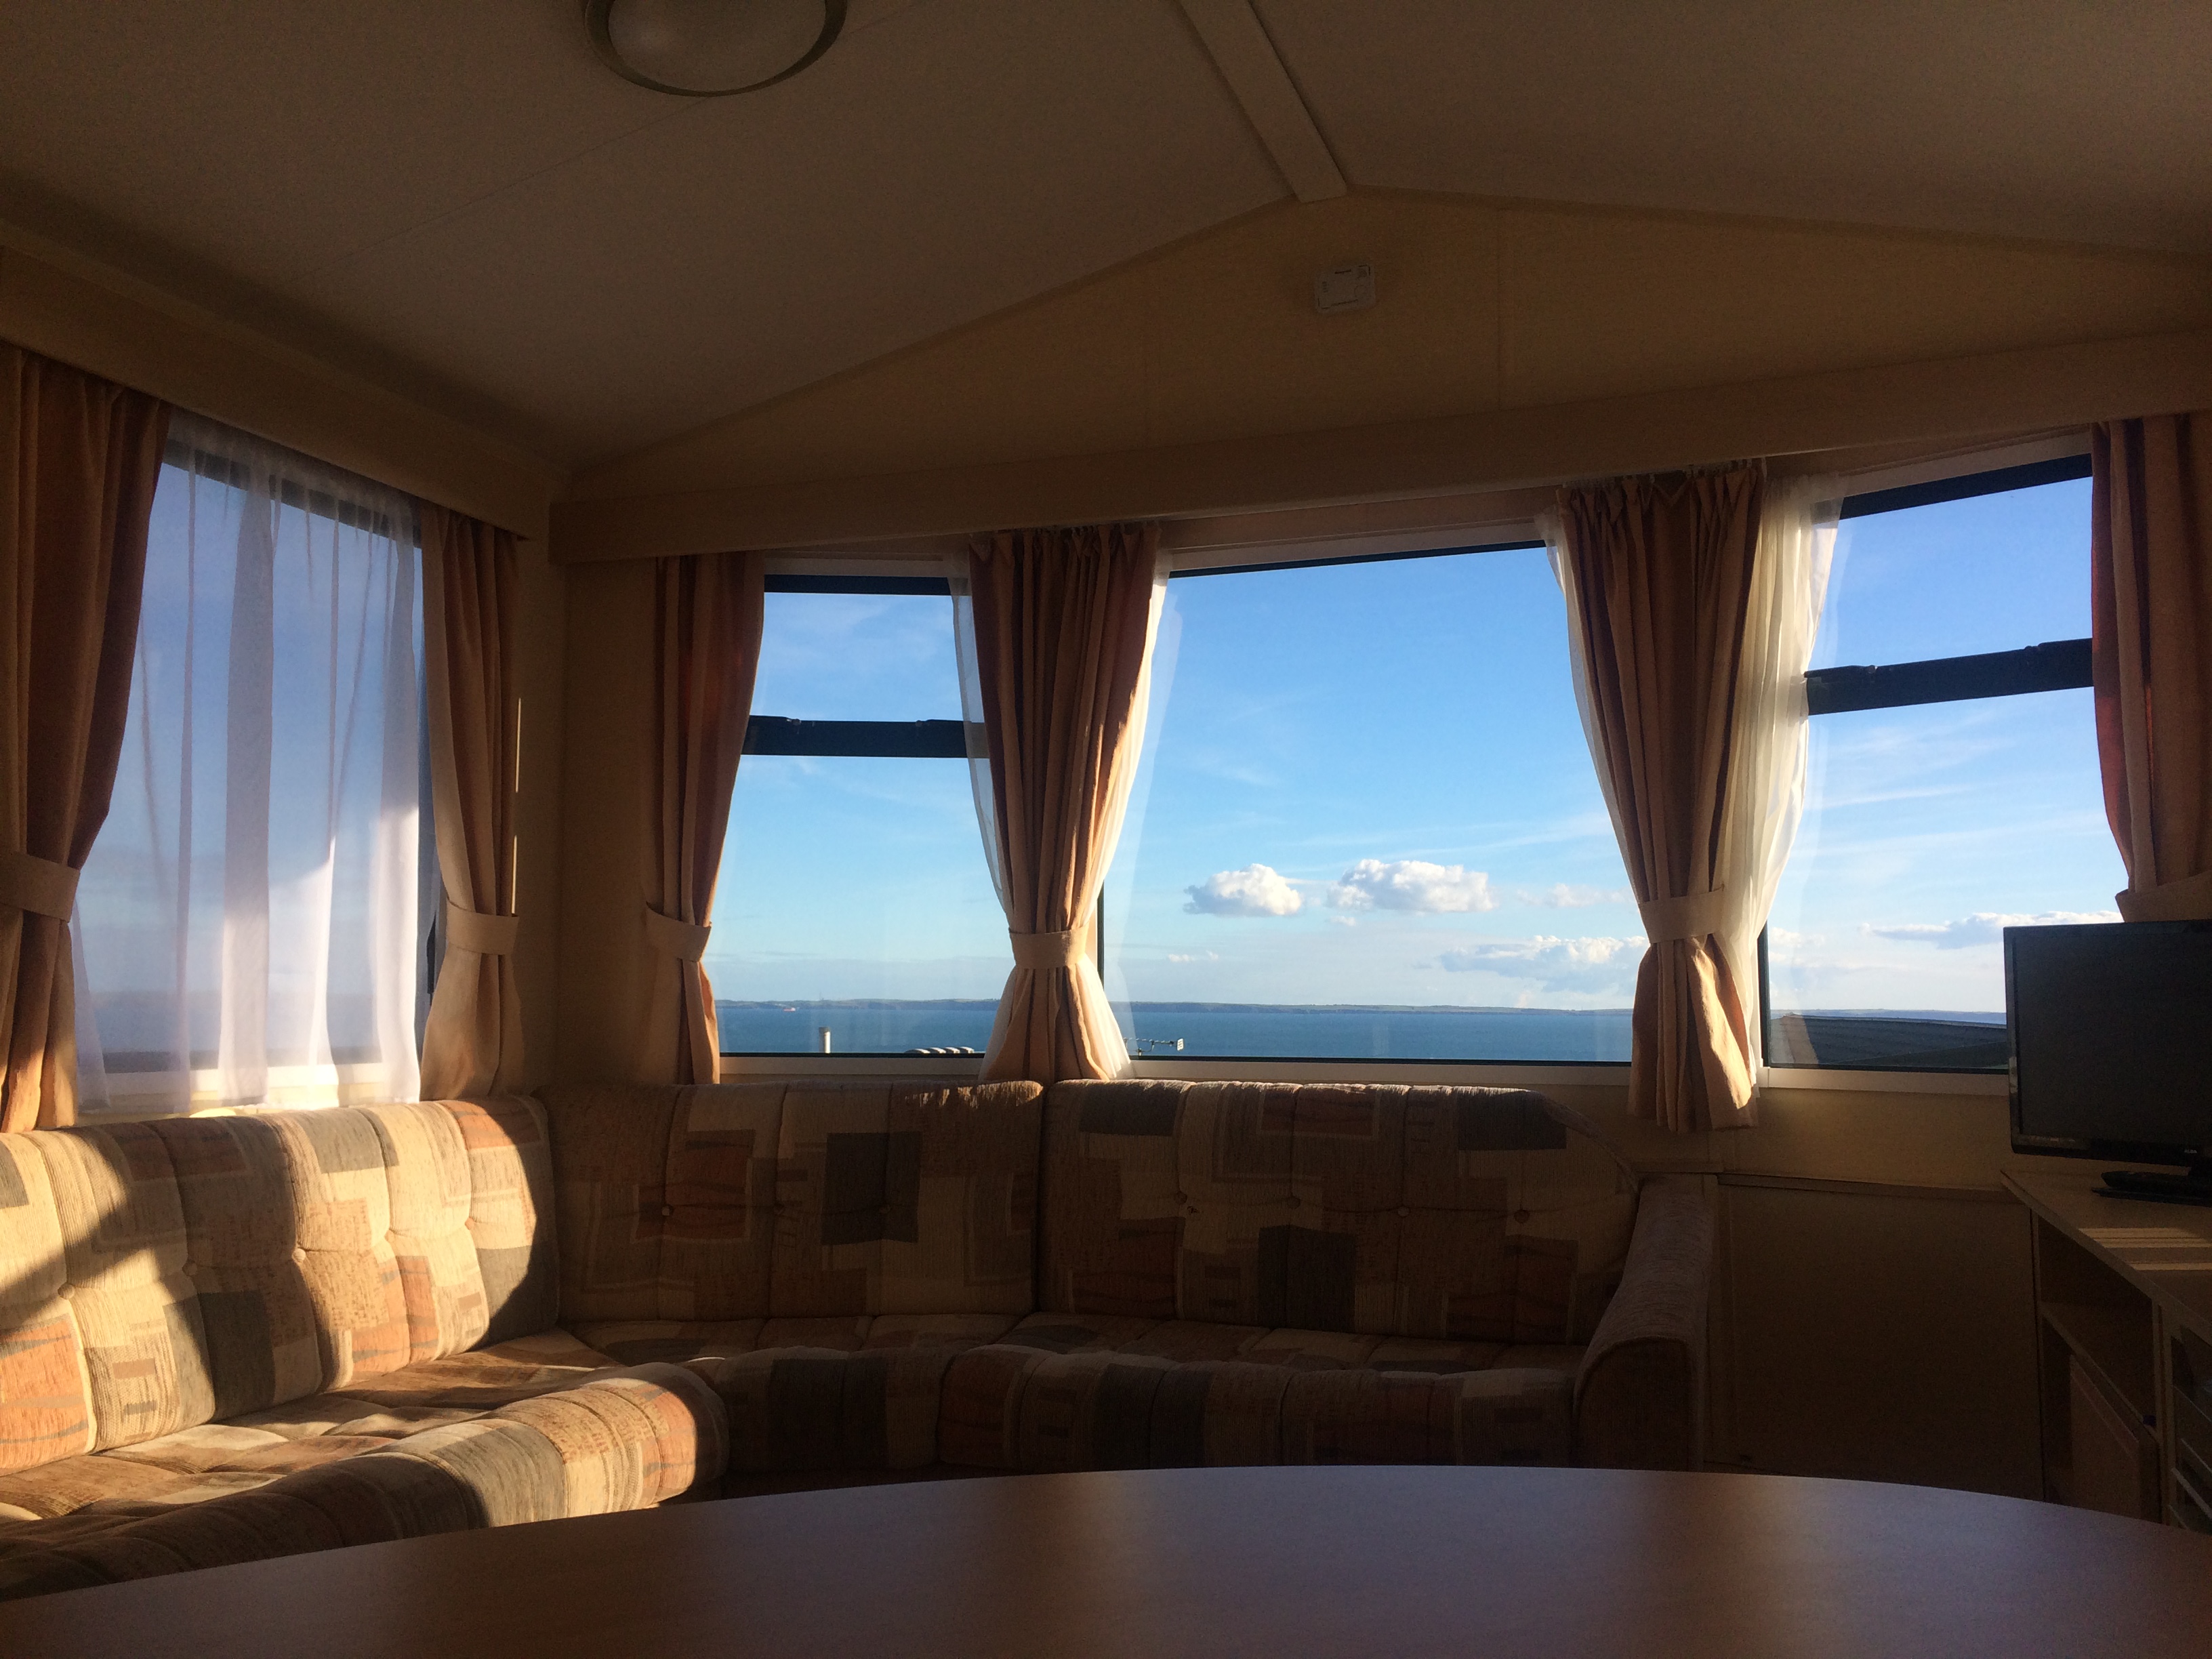 Sea view whilst sitting in living room